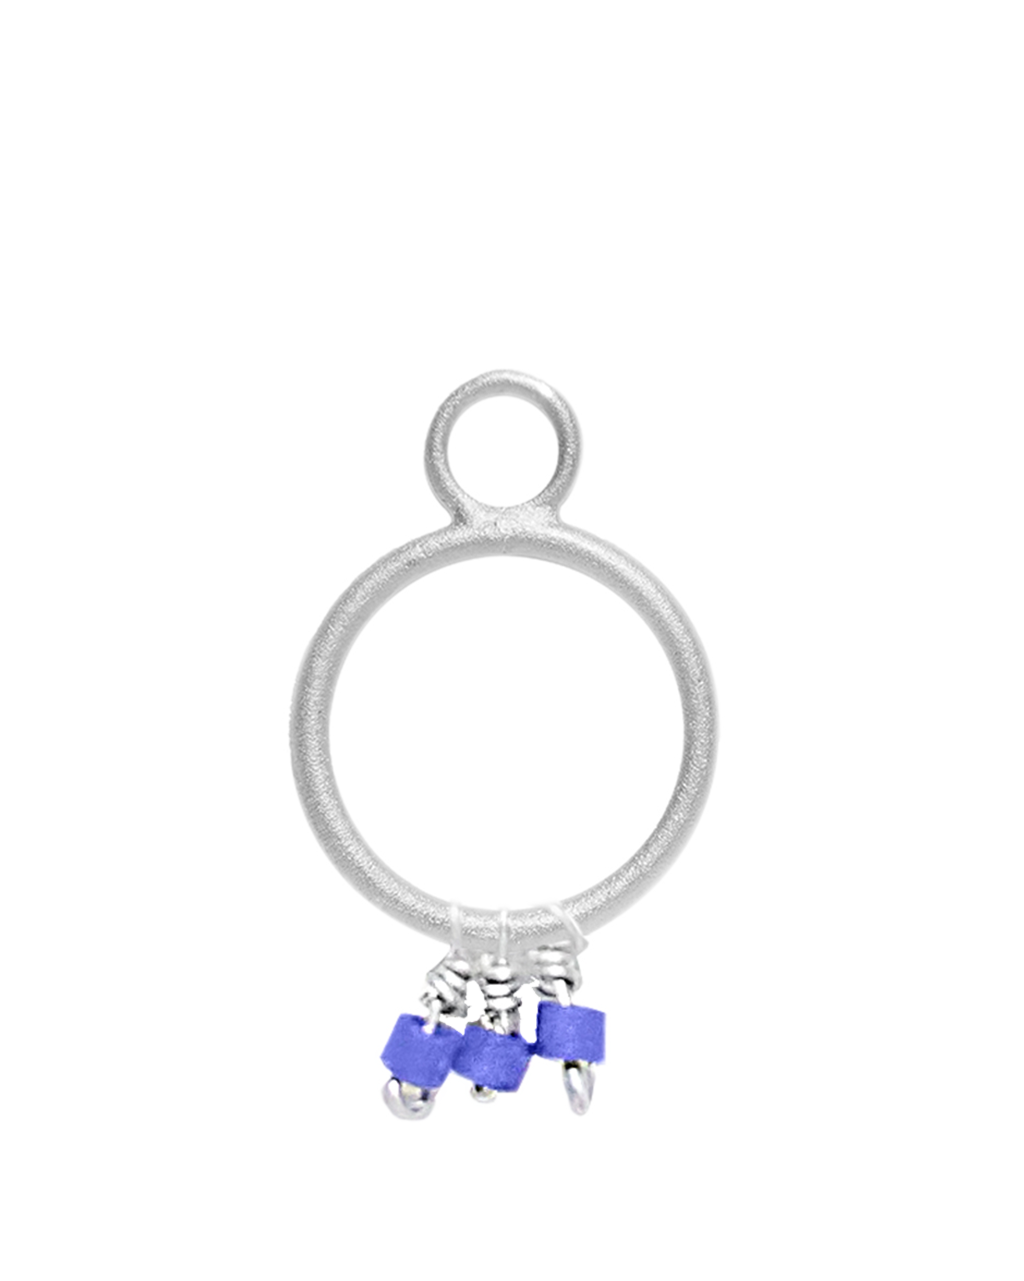 Silver Beat Charm gold